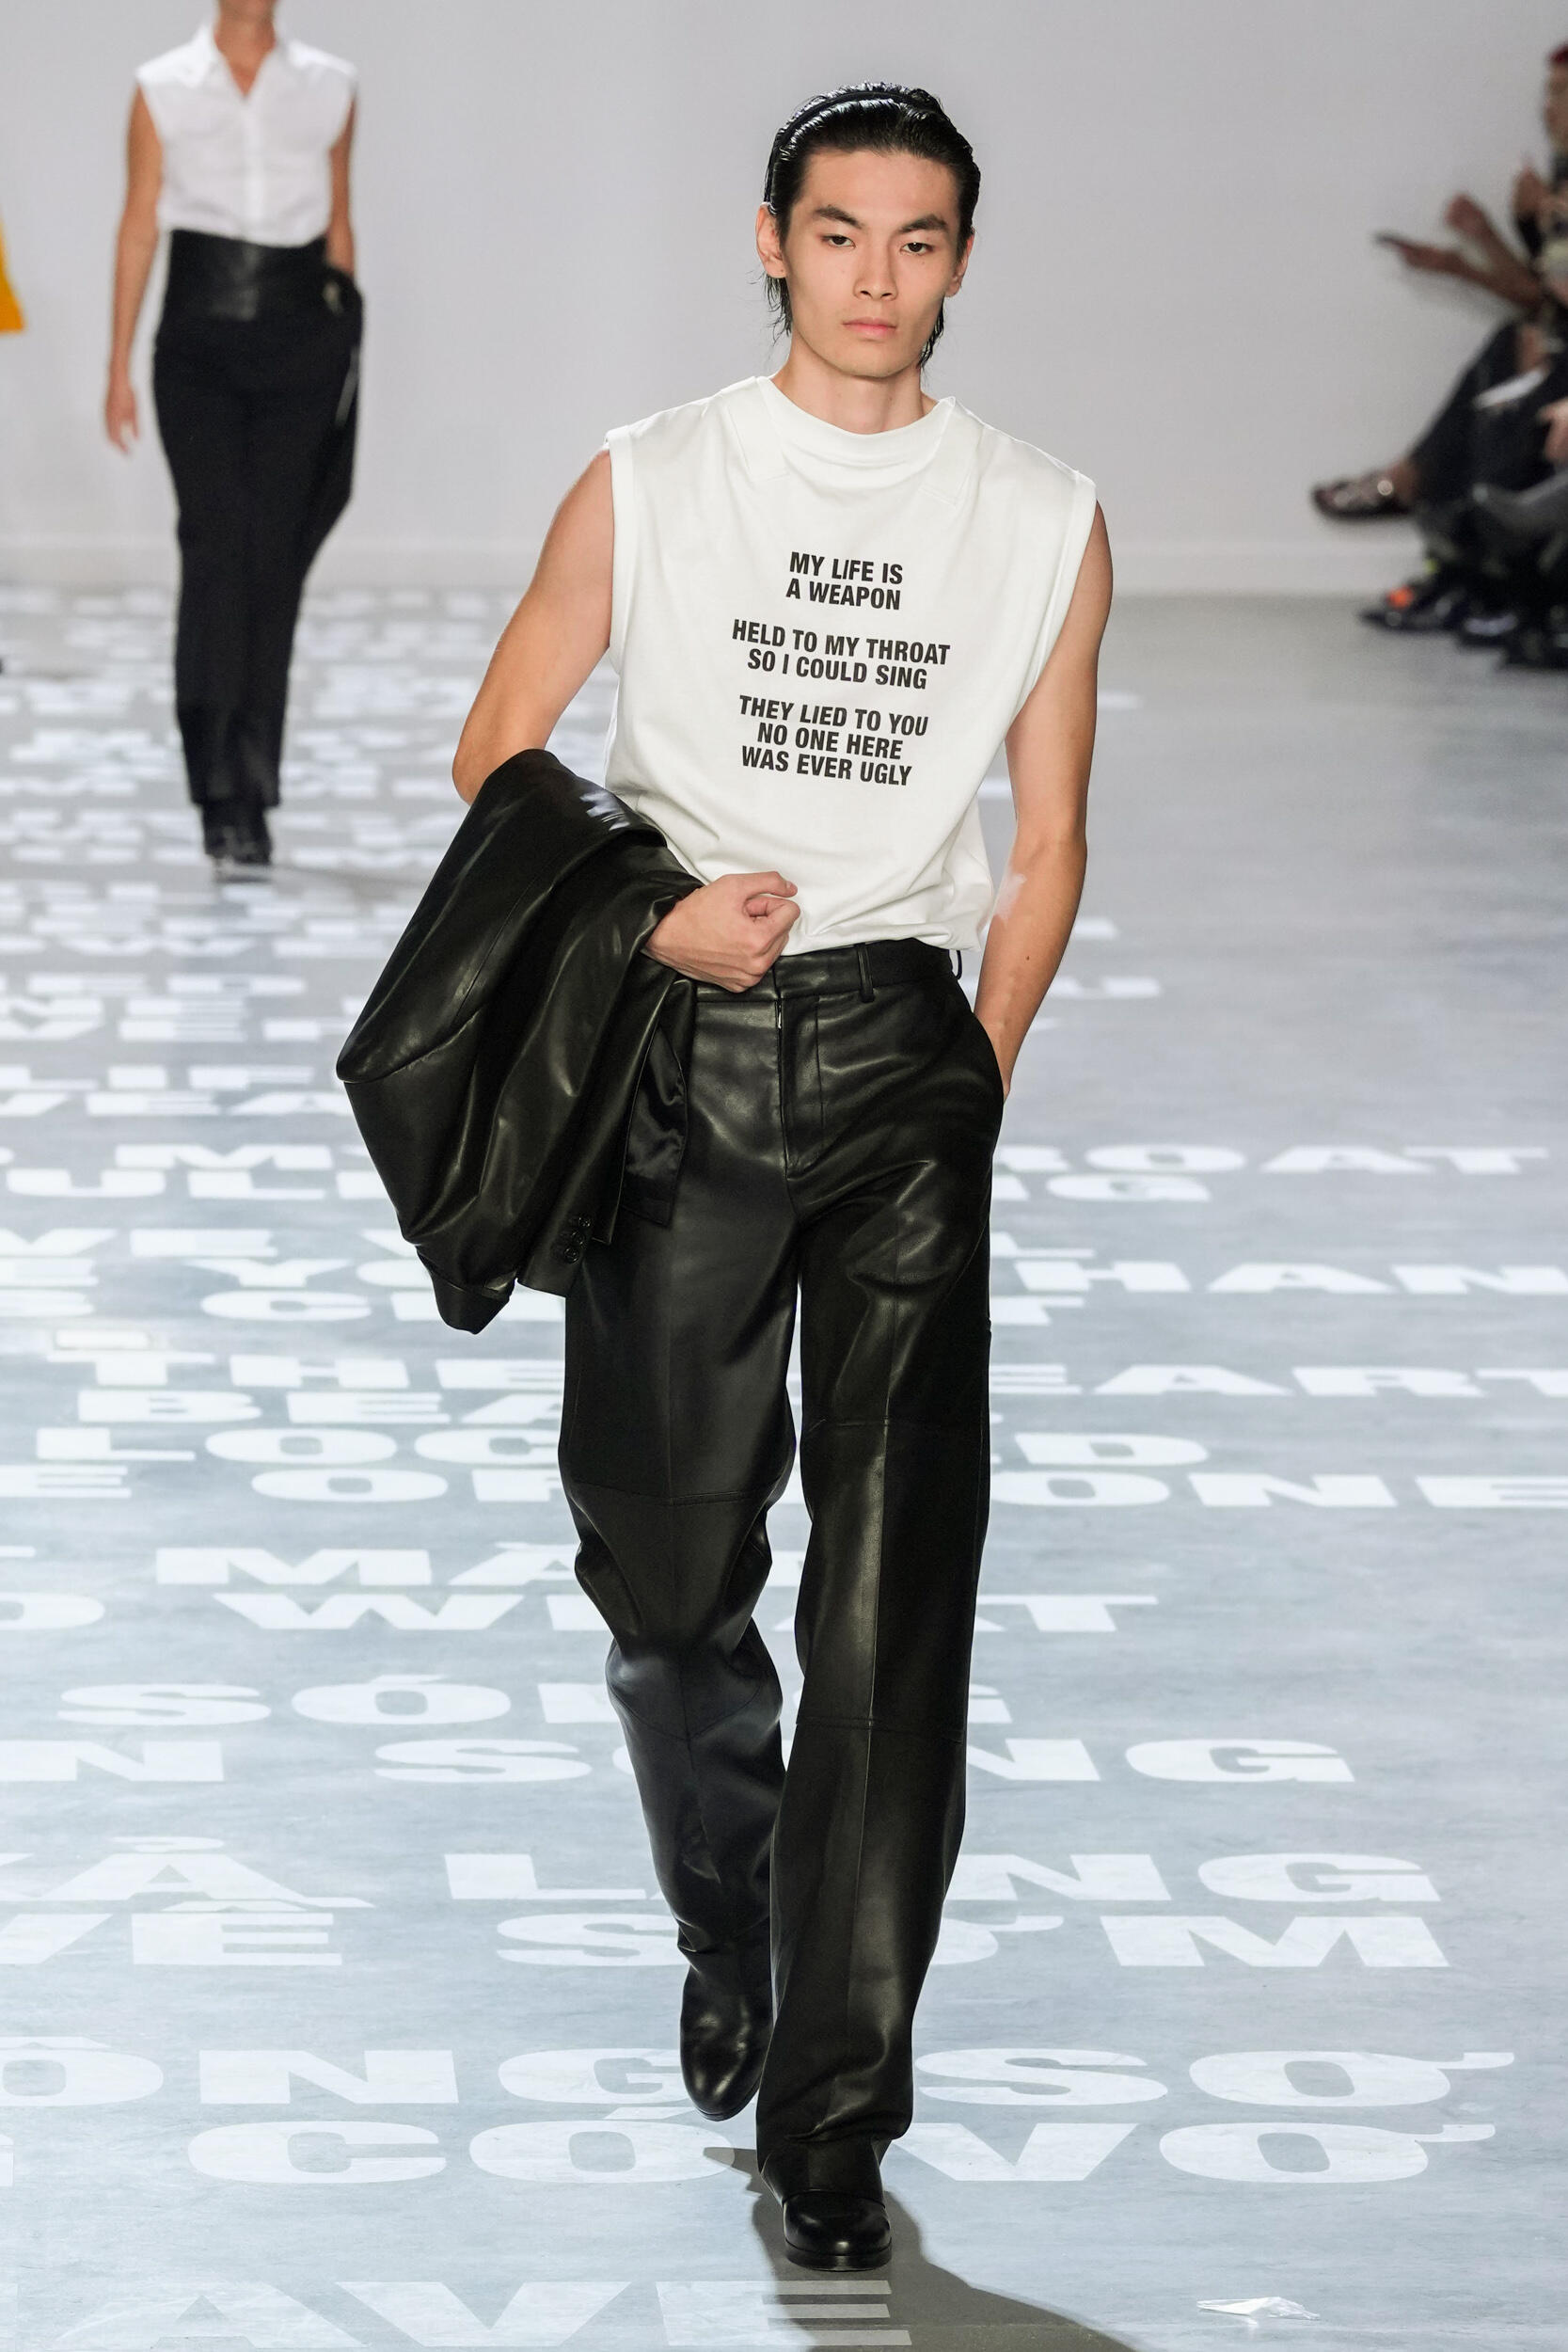 Helmut Lang — Style News, Fashion Photography, Interviews